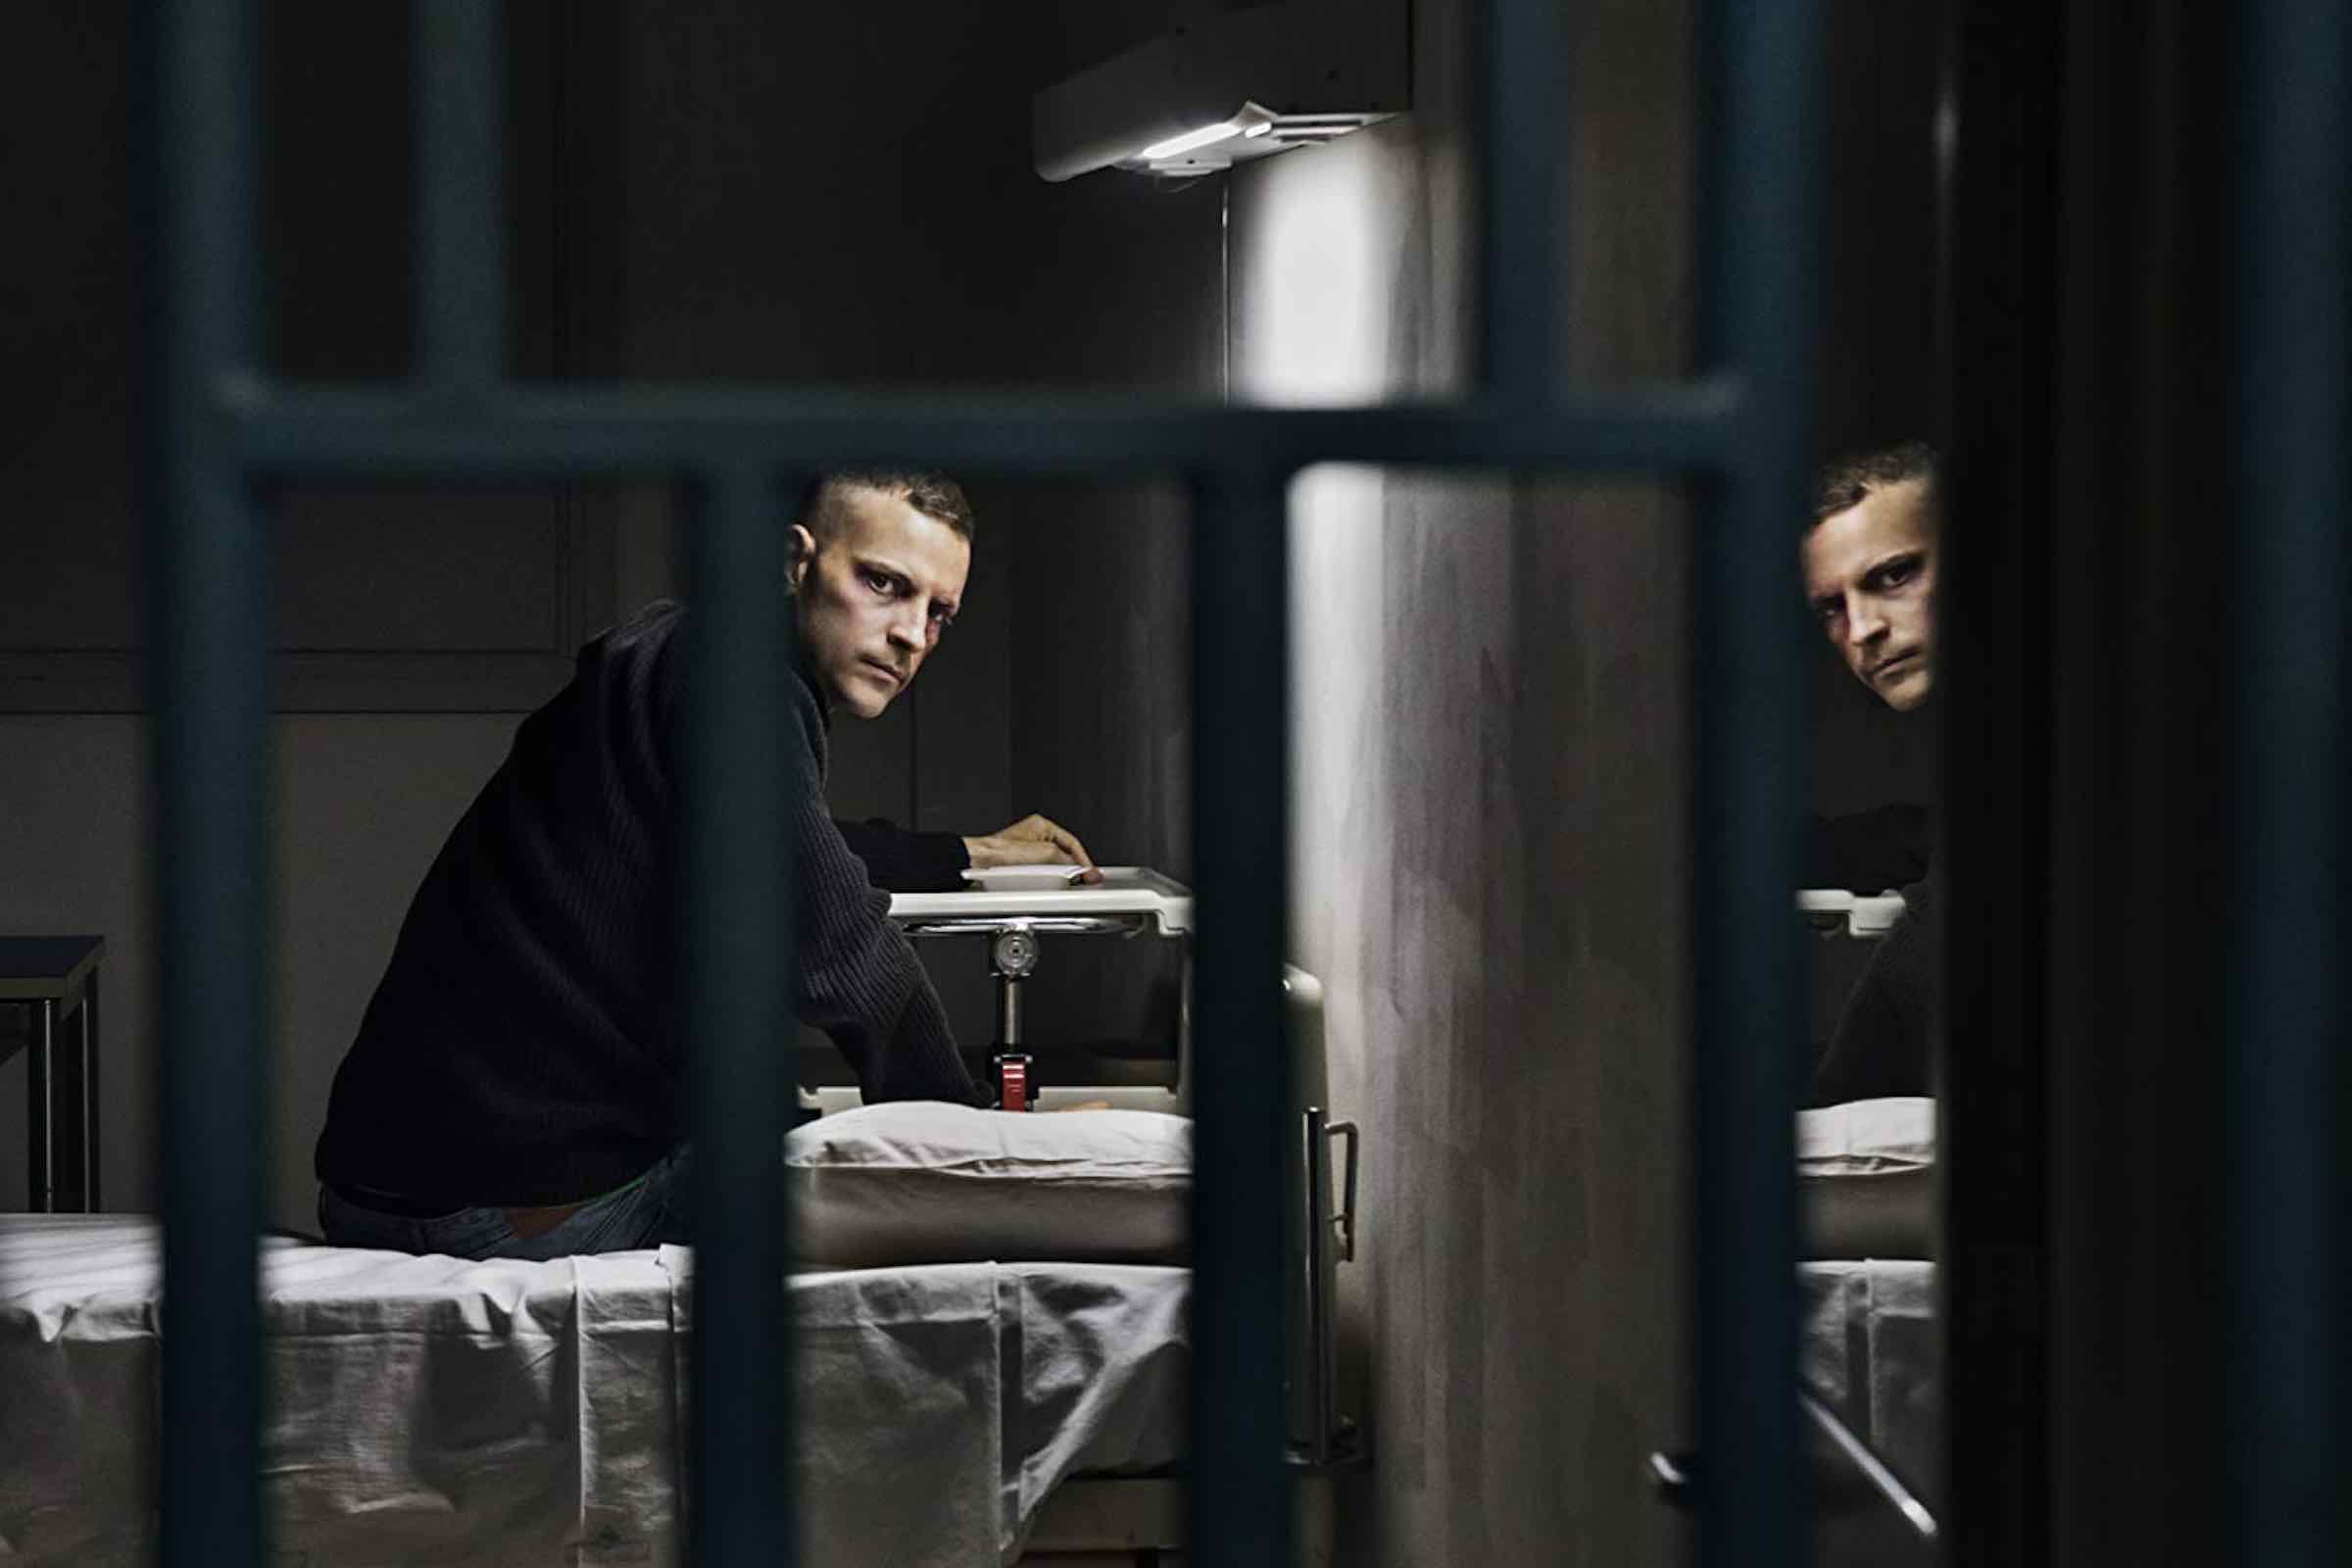 'On My Skin' ('Sulla Mia Pelle') is a hard-hitting Italian drama based on the real story of 31-year-old Stefano Cucchi, who died in custody in 2009.